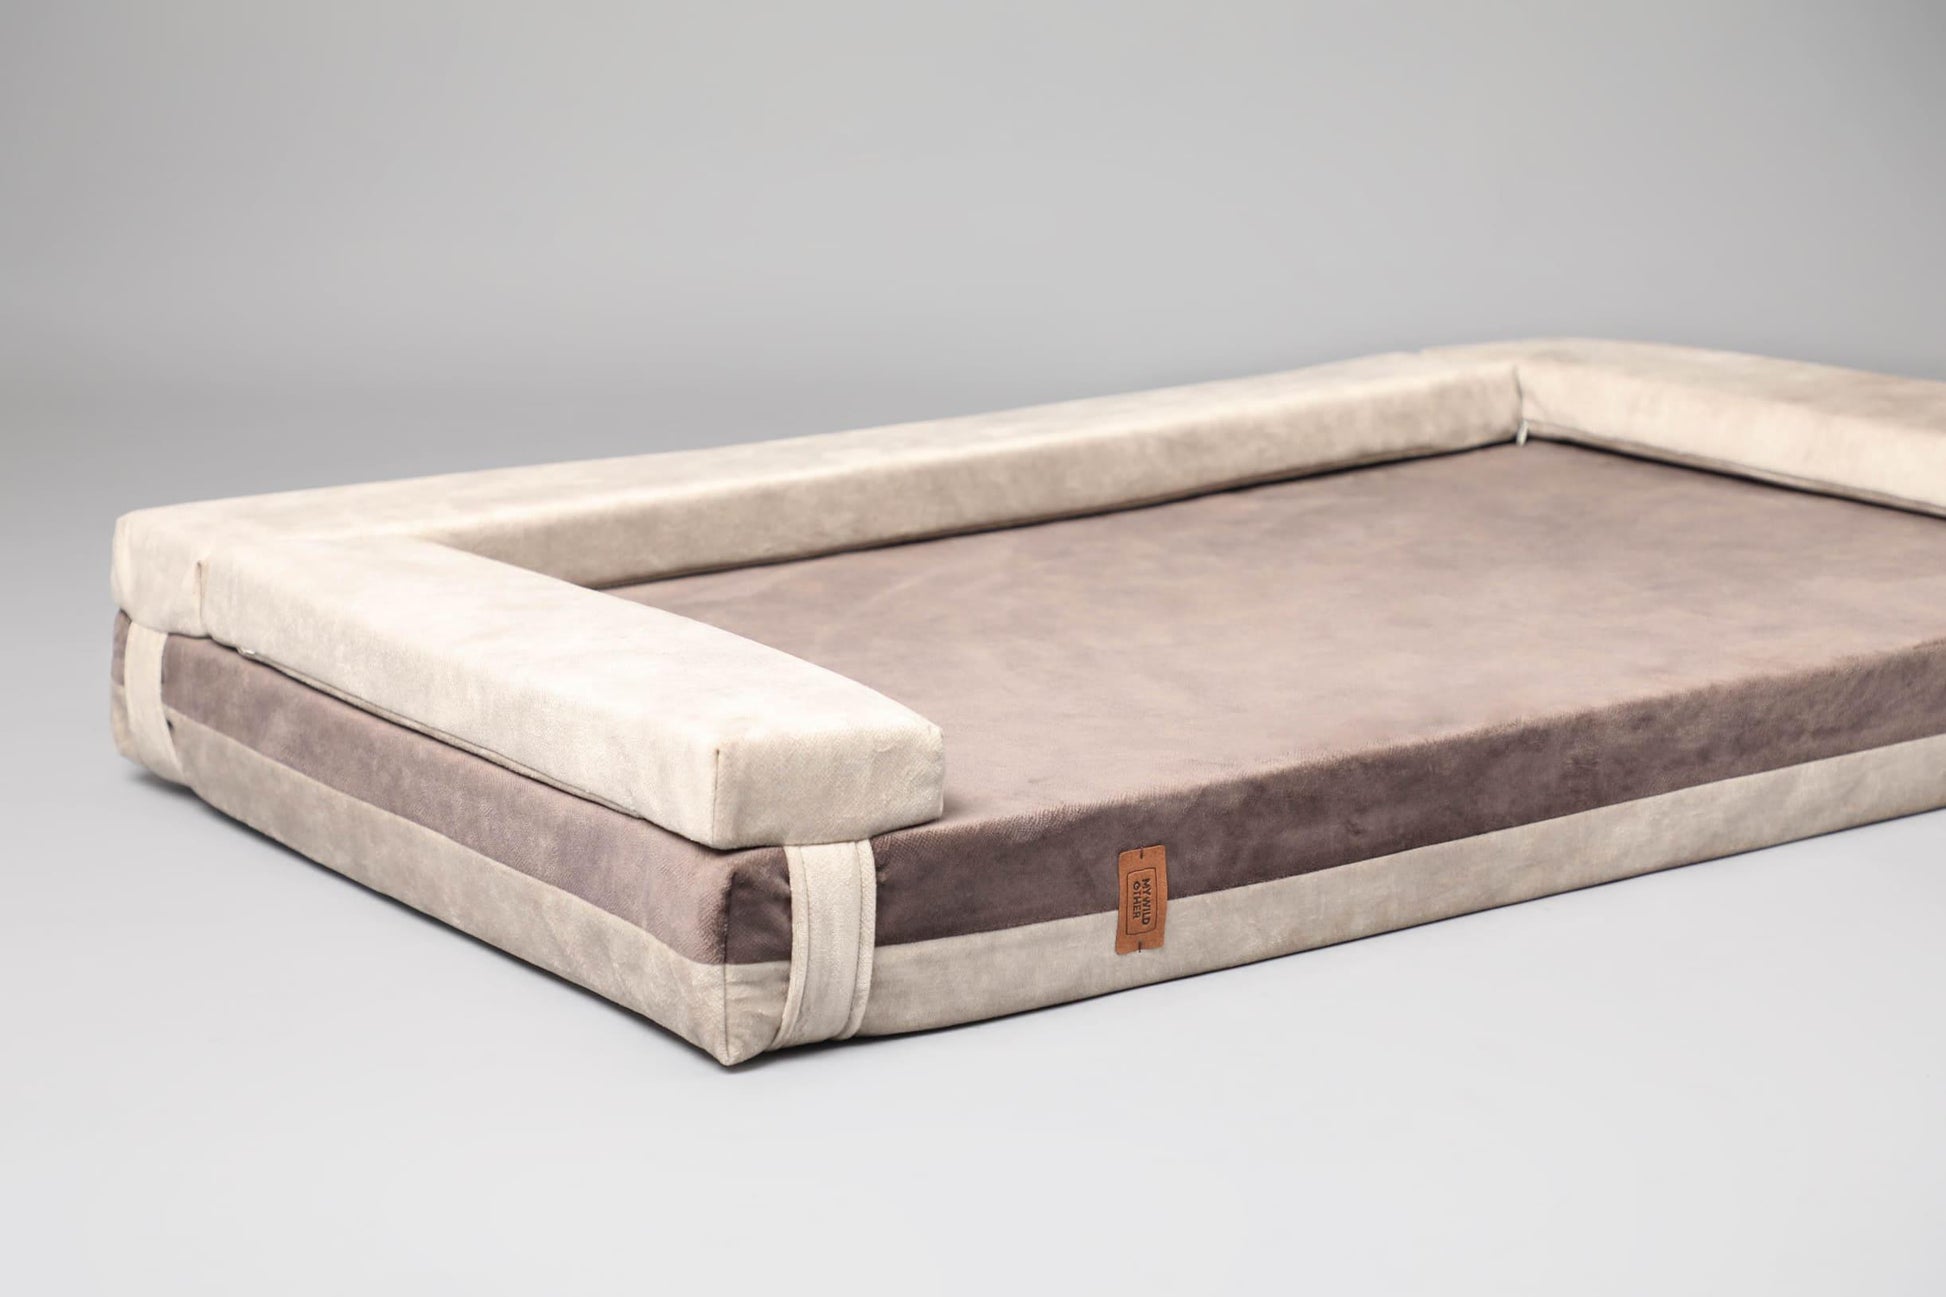 Transformer dog bed | Extra comfort & support | 2-sided | BEIGE+TAUPE - premium dog goods handmade in Europe by My Wild Other